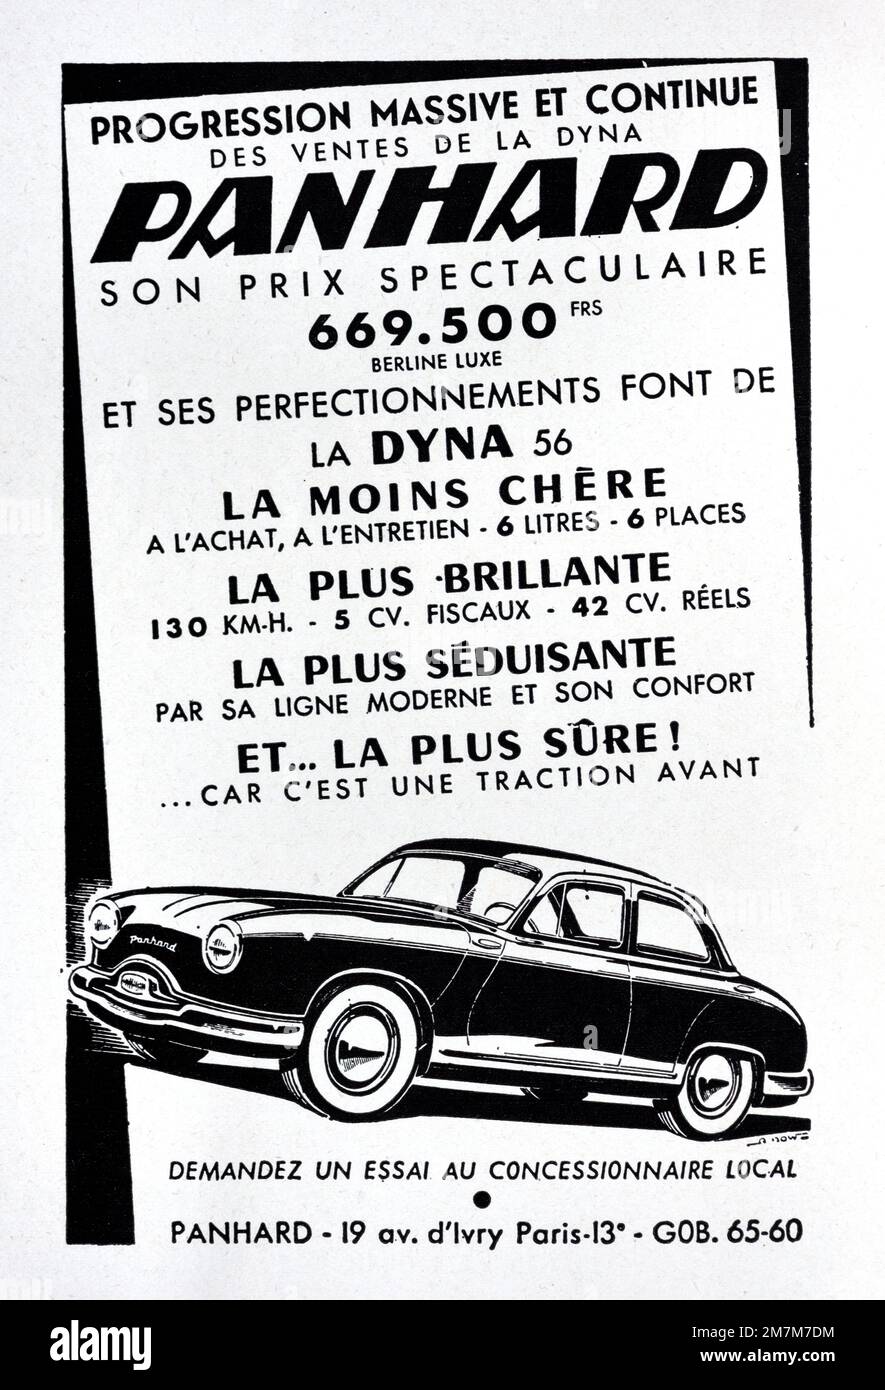 Vintage or Old Advert, Advertisement, Publicity or Illustration for Panhard Dyna 56 Car or Automobile 1956 Stock Photo